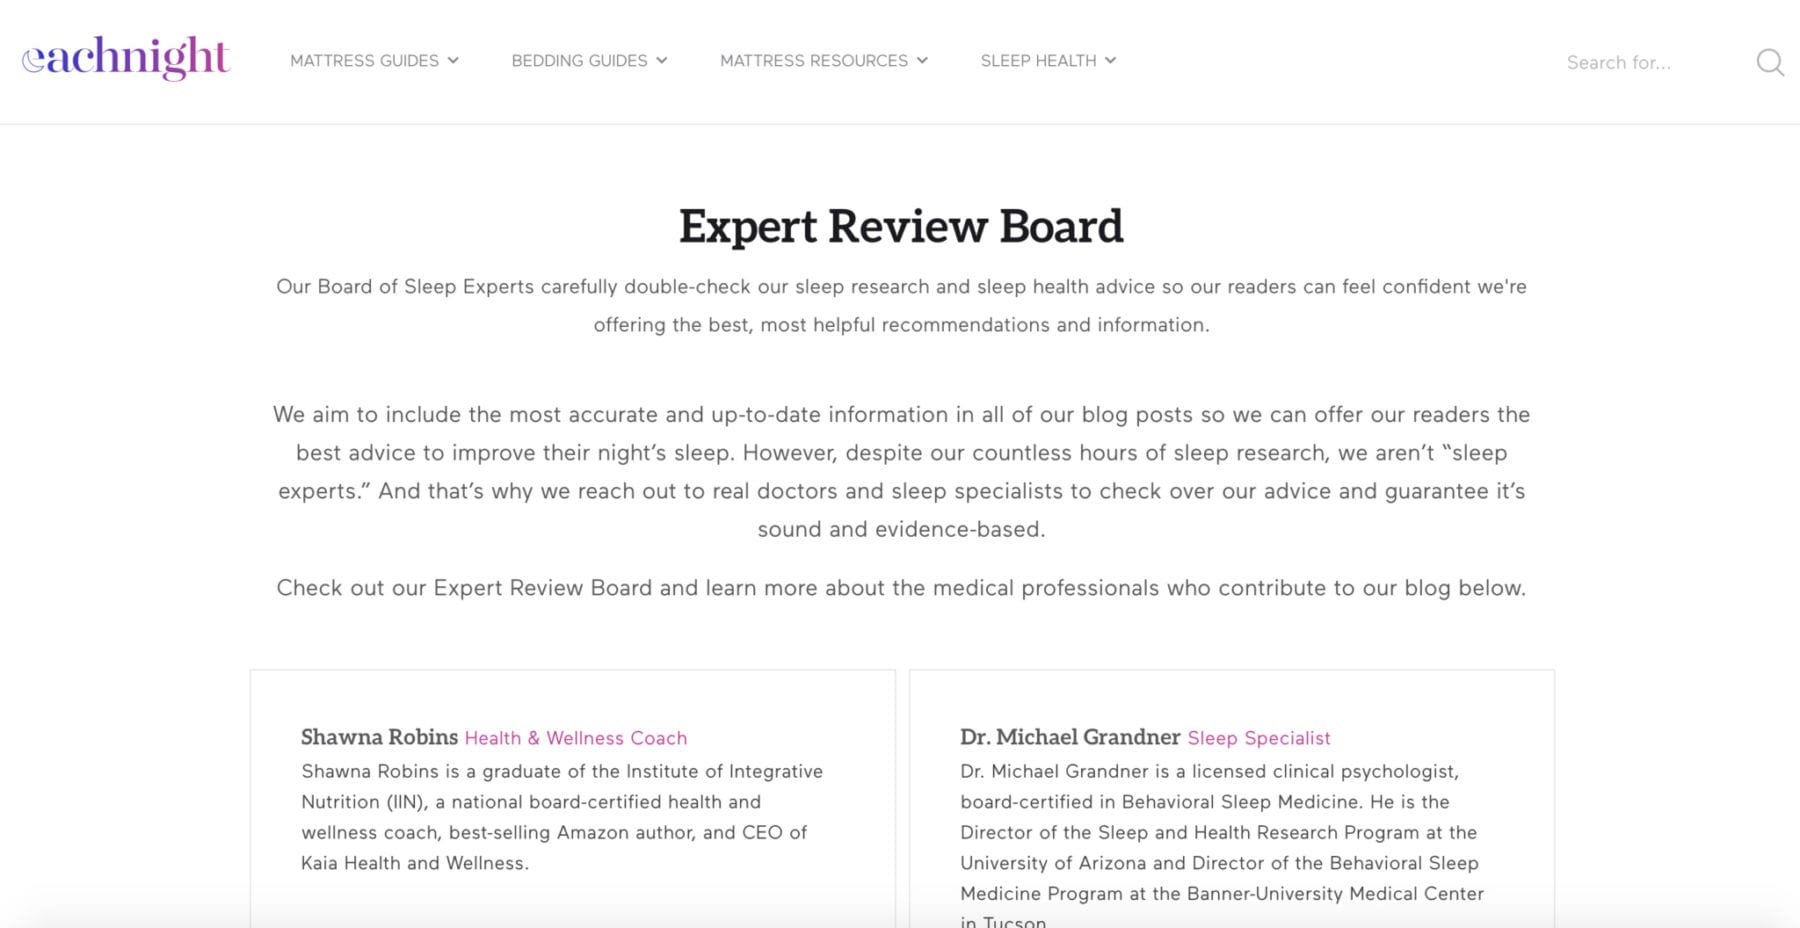 screenshot of the experts page on EachNight's website